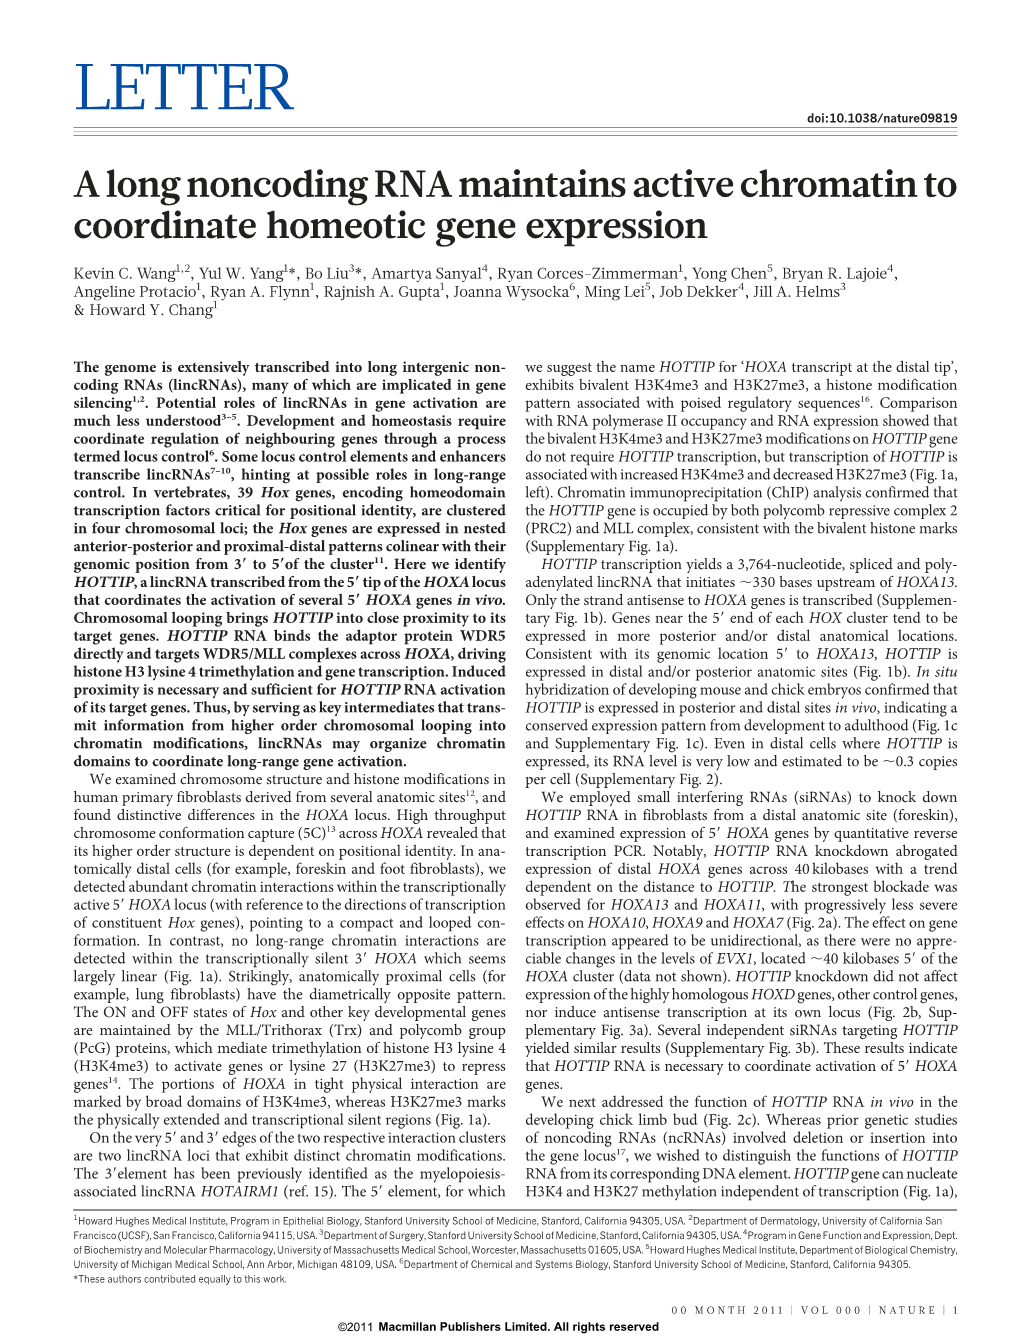 A Long Noncoding RNA Maintains Active Chromatin to Coordinate Homeotic Gene Expression